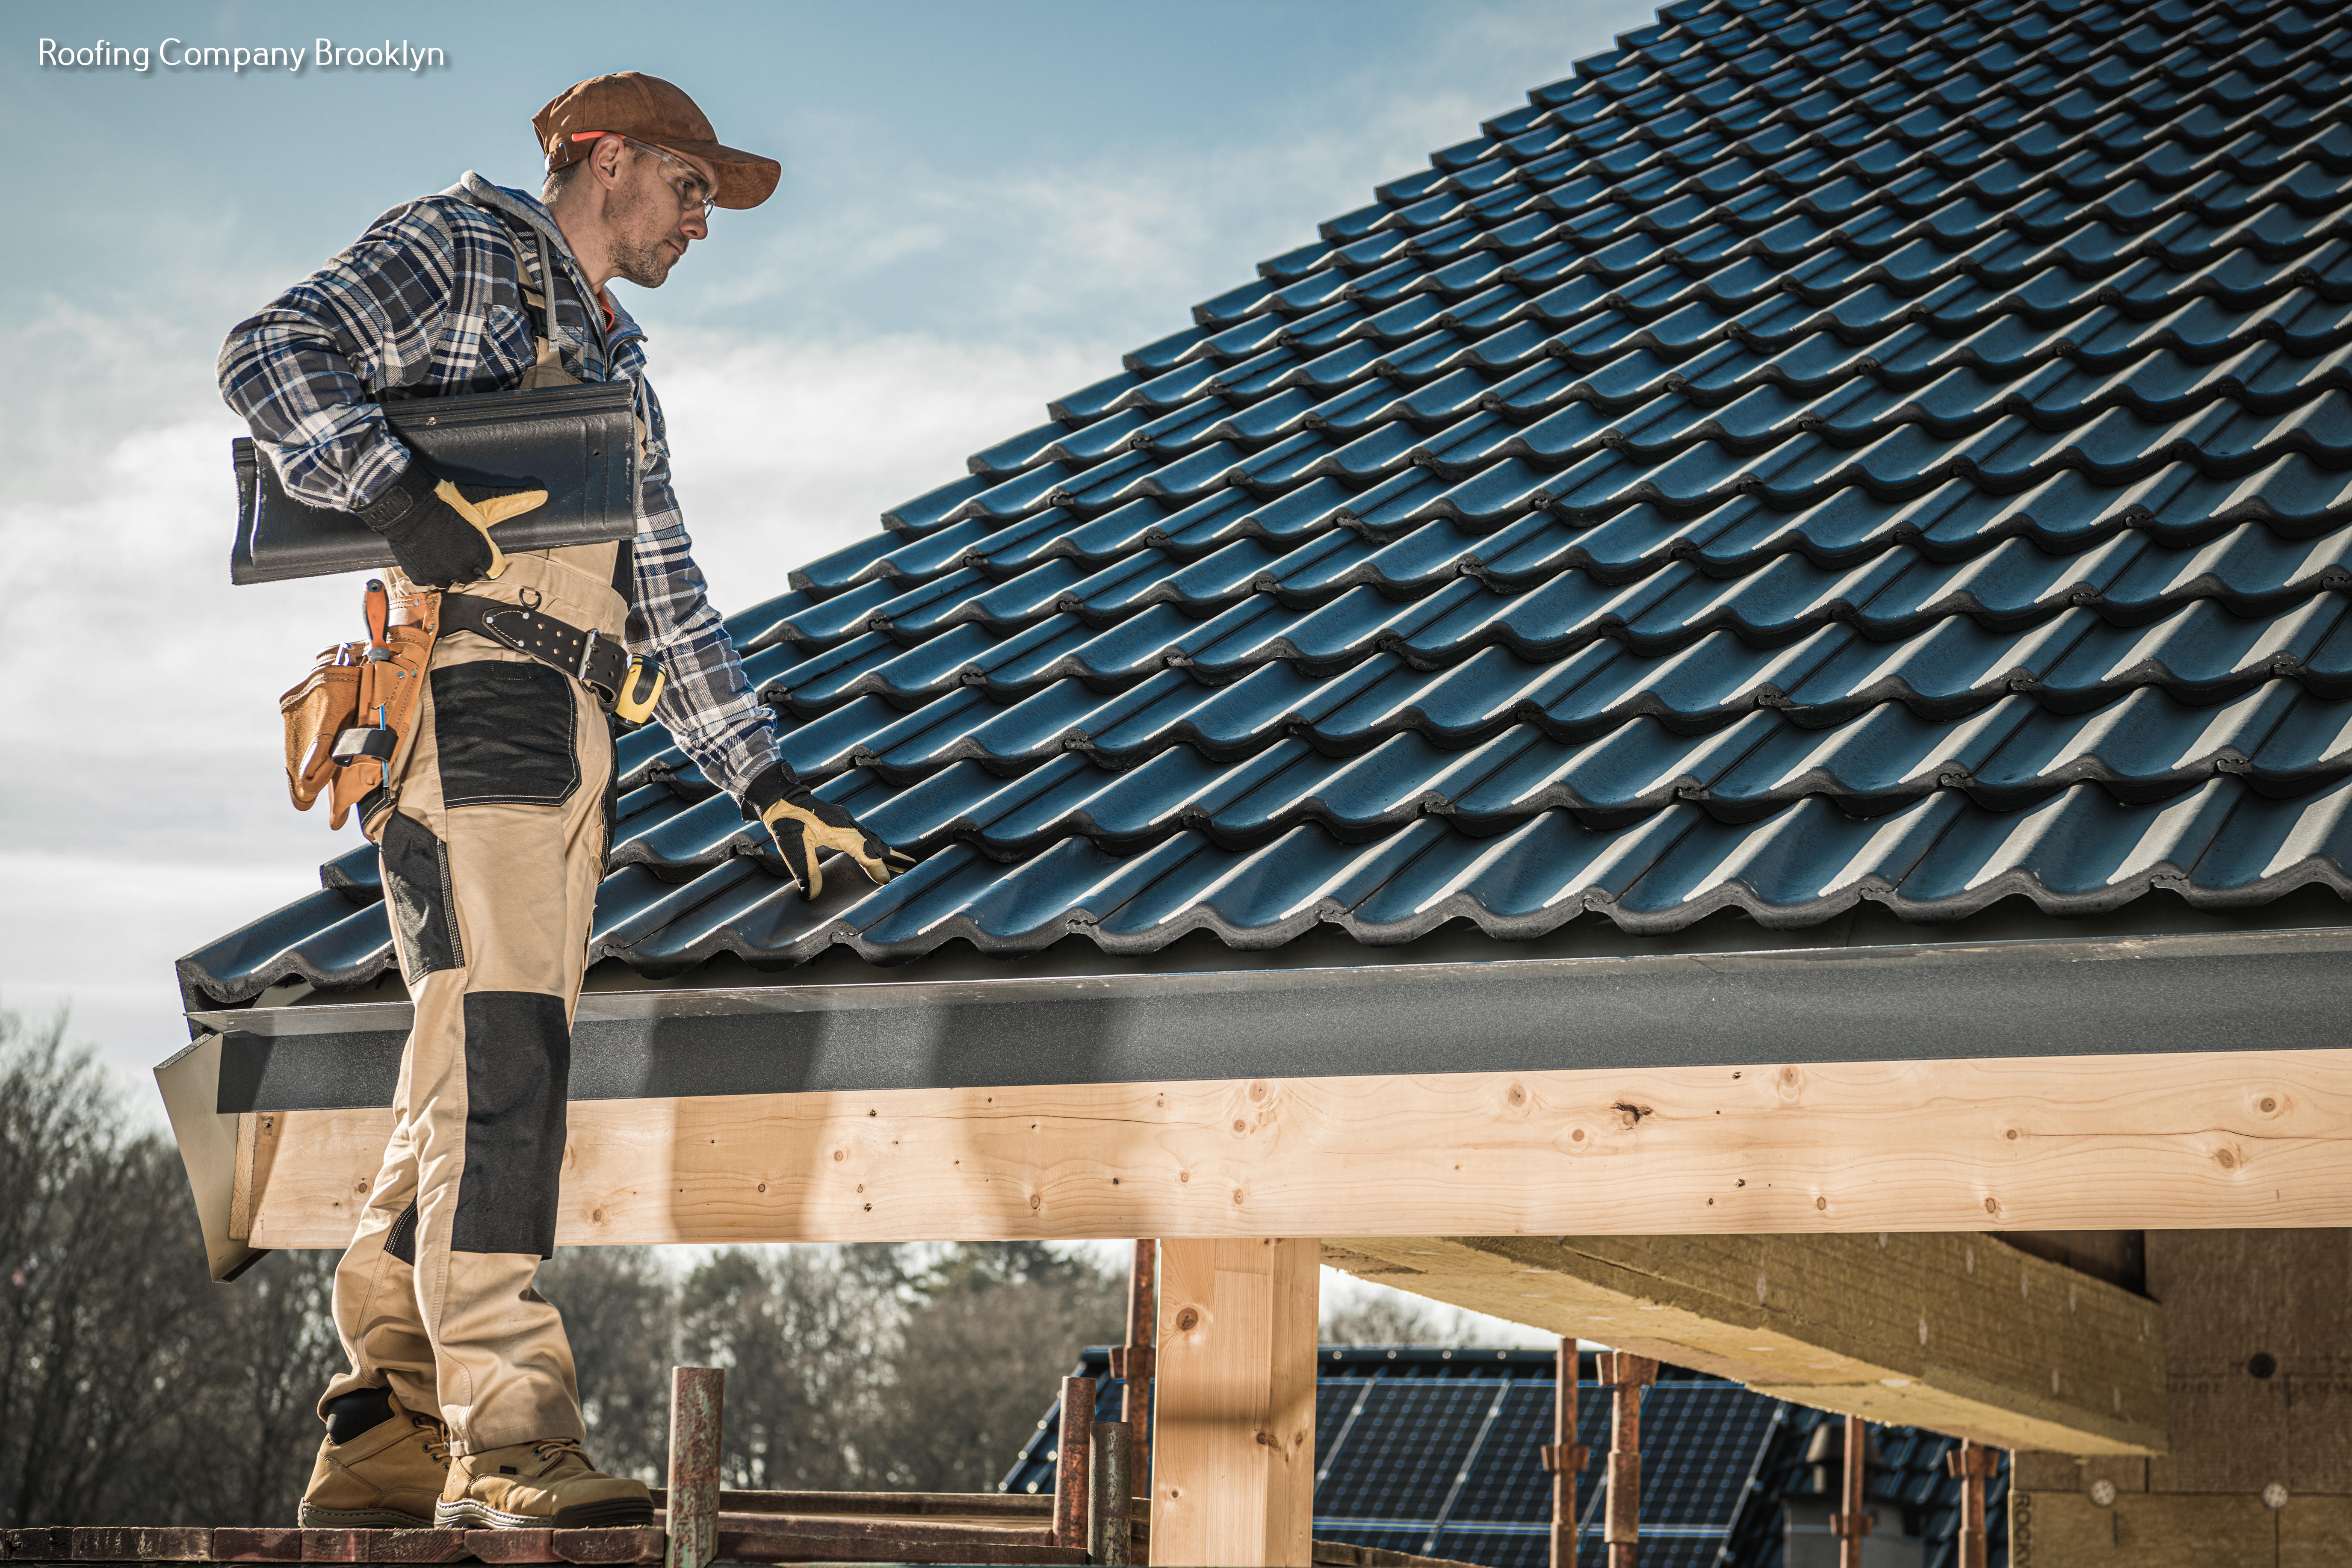 Skyward Roofing Explains What People Should Consider When Hiring Roofing Contractors 